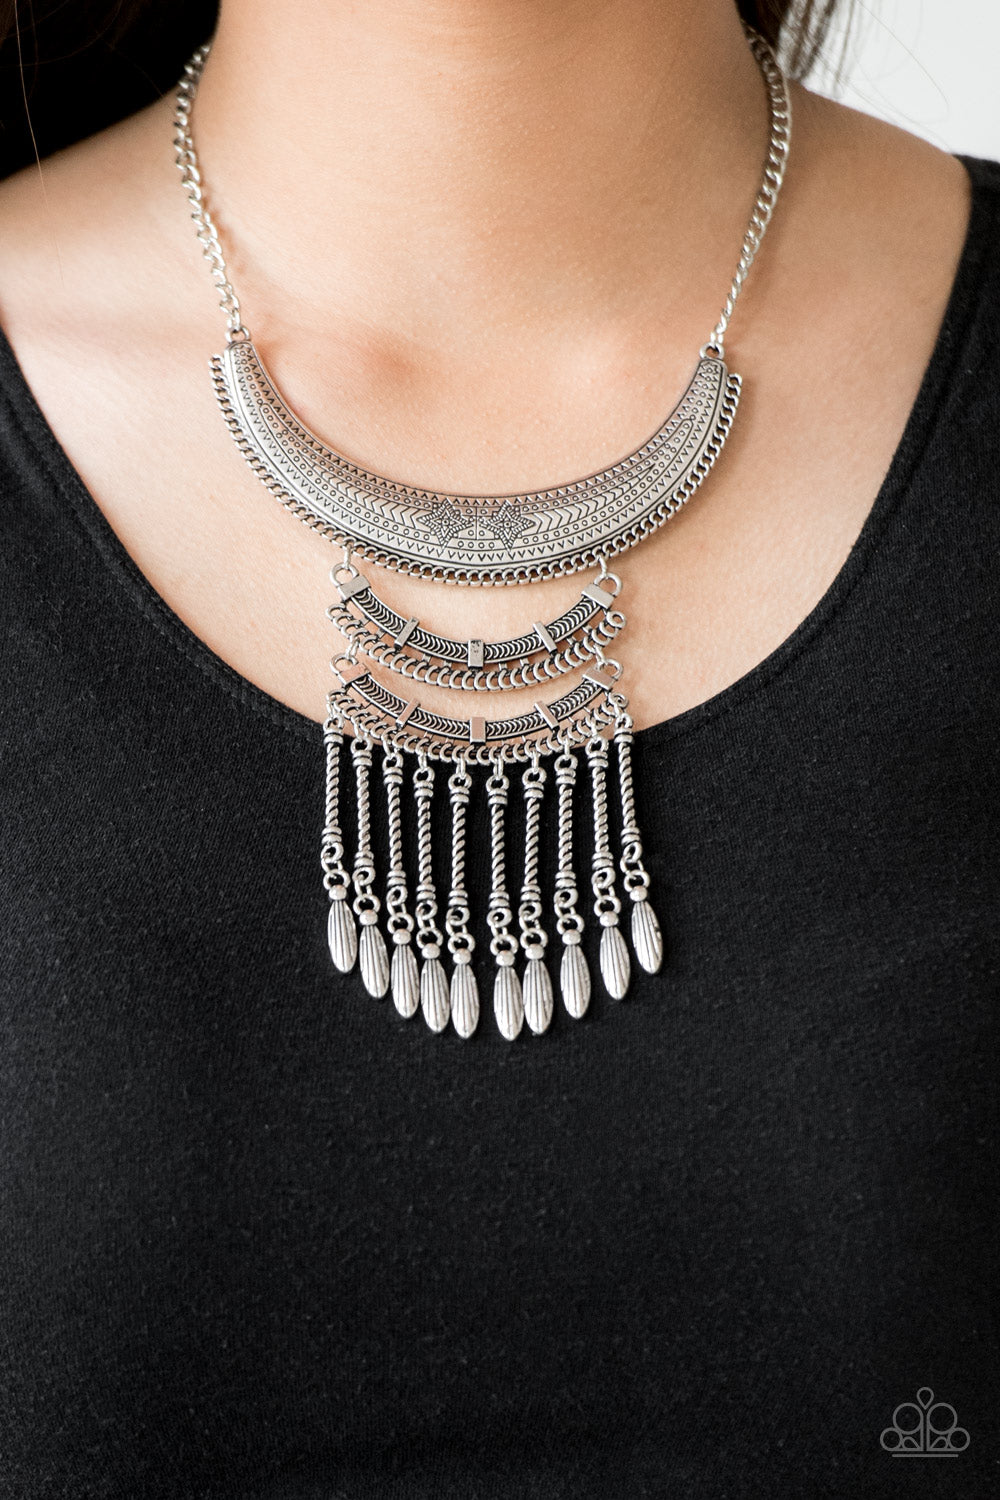 Eastern Empress Silver-Necklace